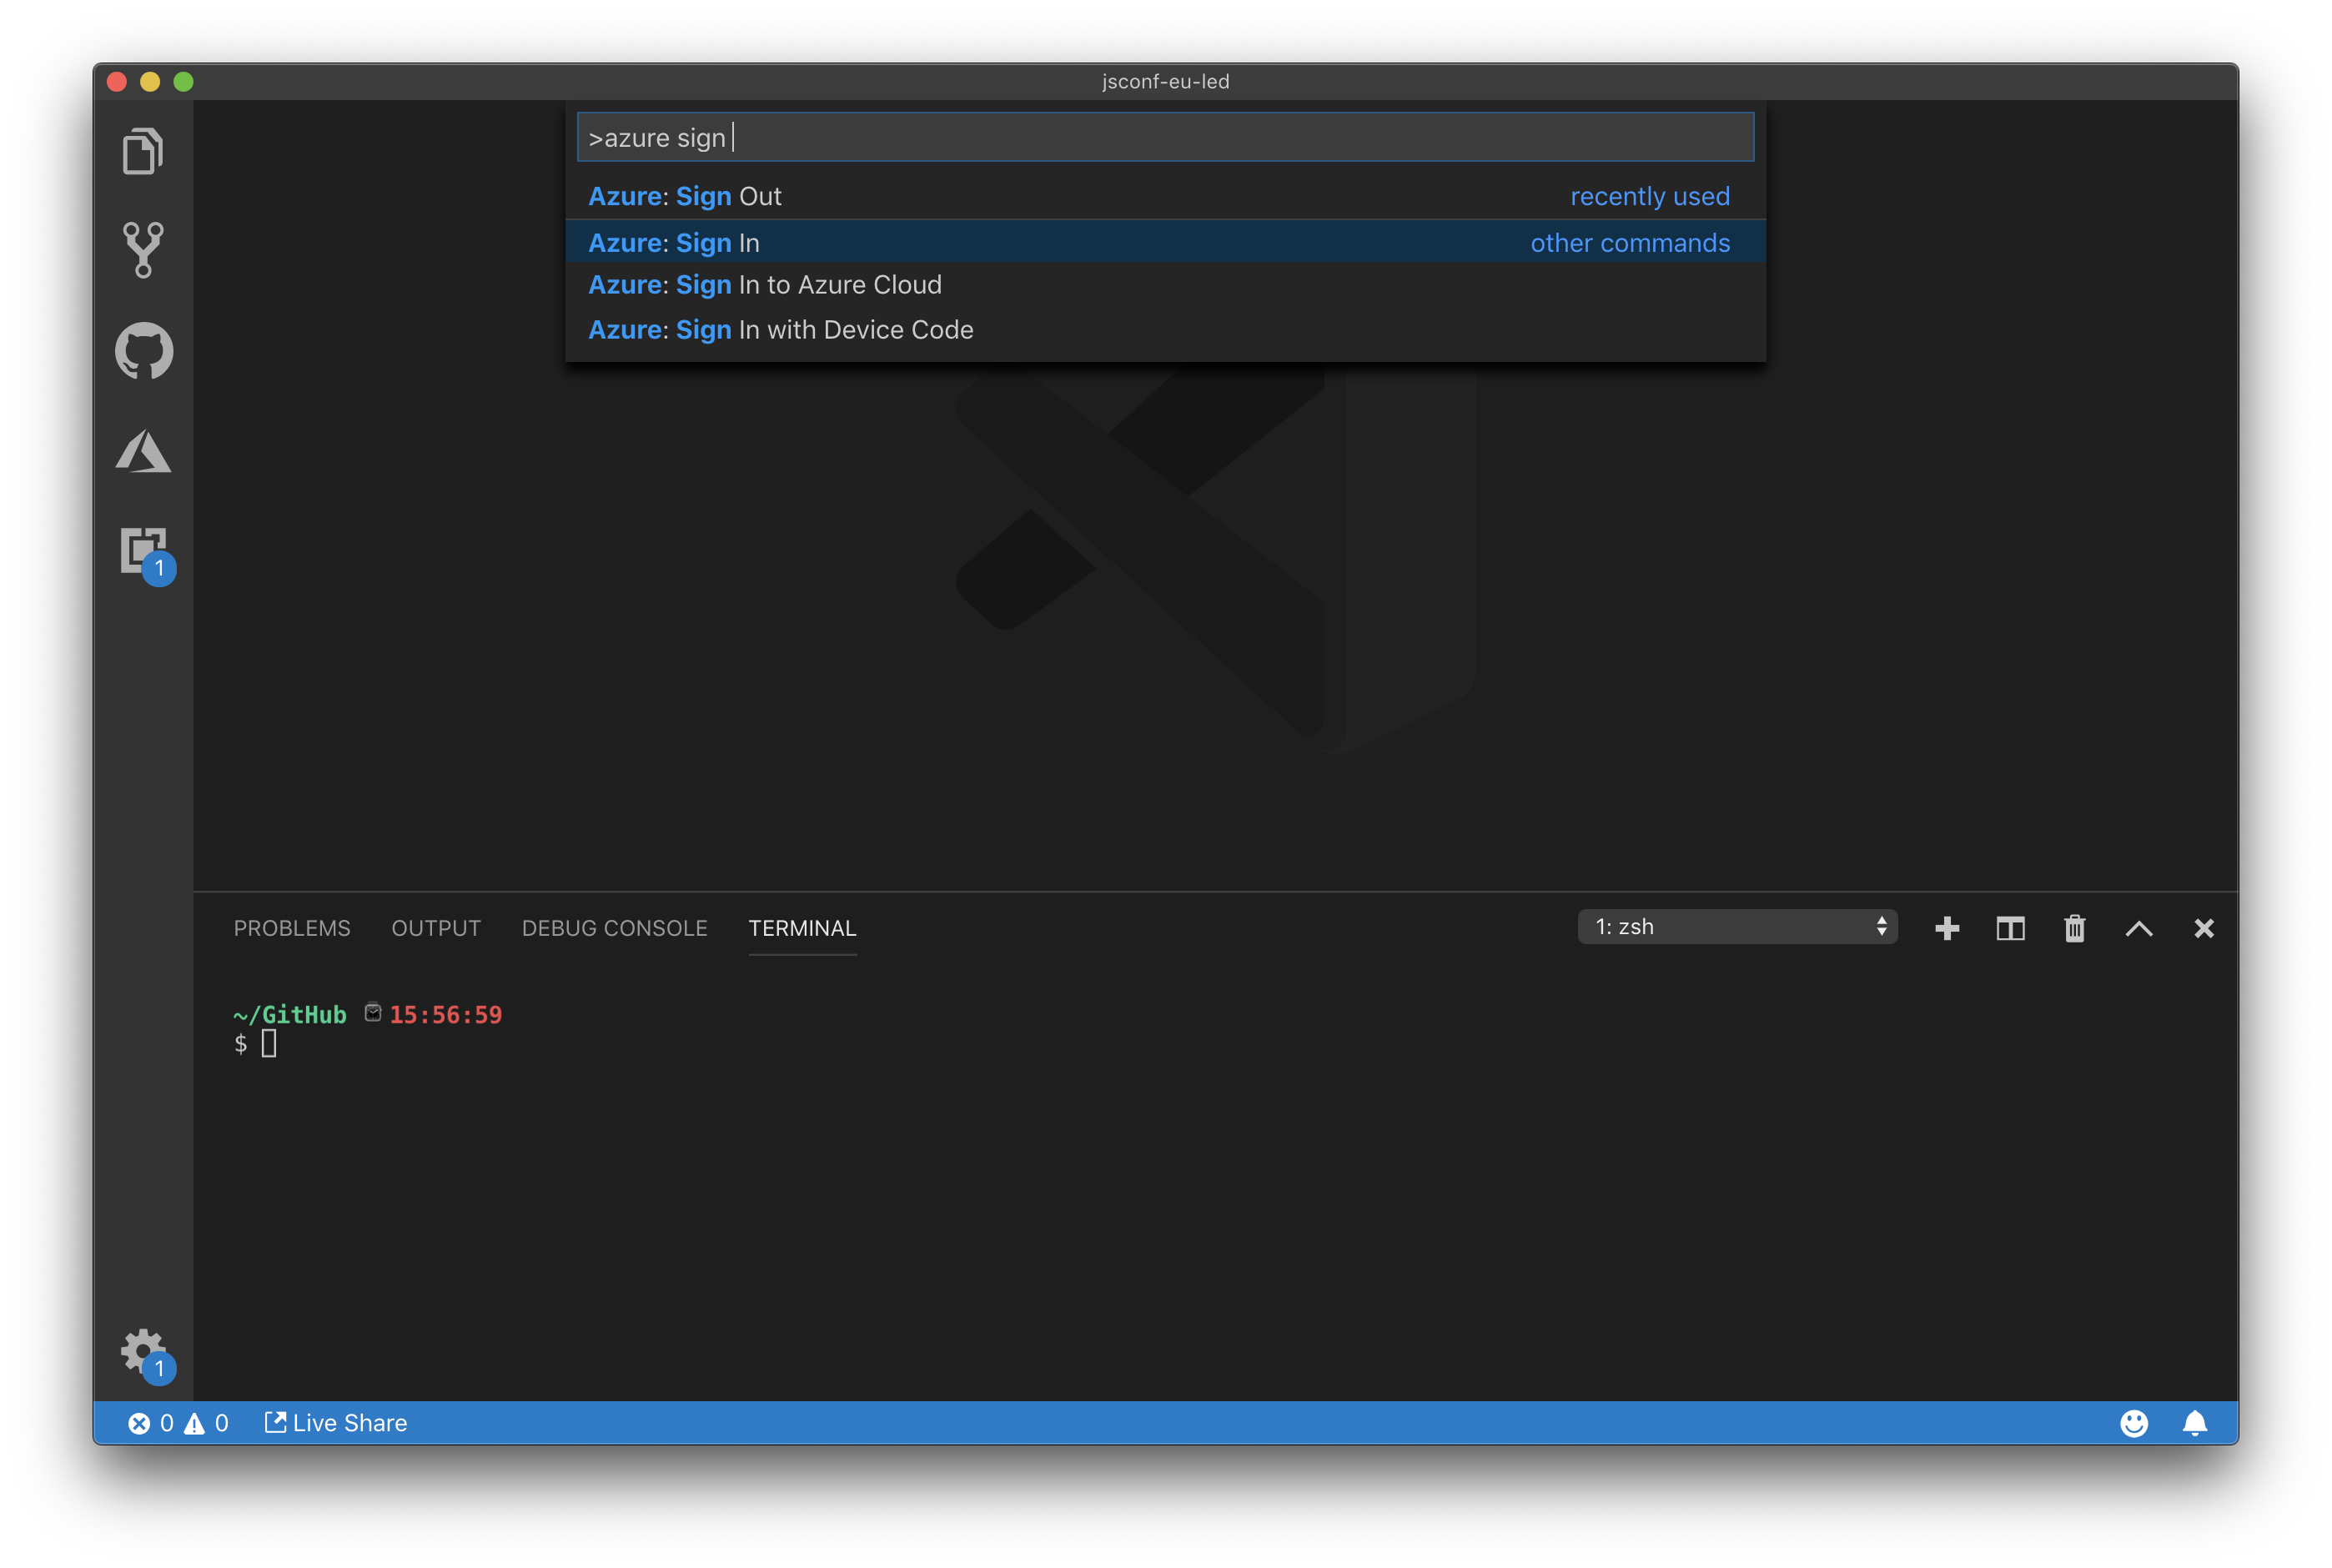 Screenshot of the VS Code Command Pallete displaying the Azure: Sign in option